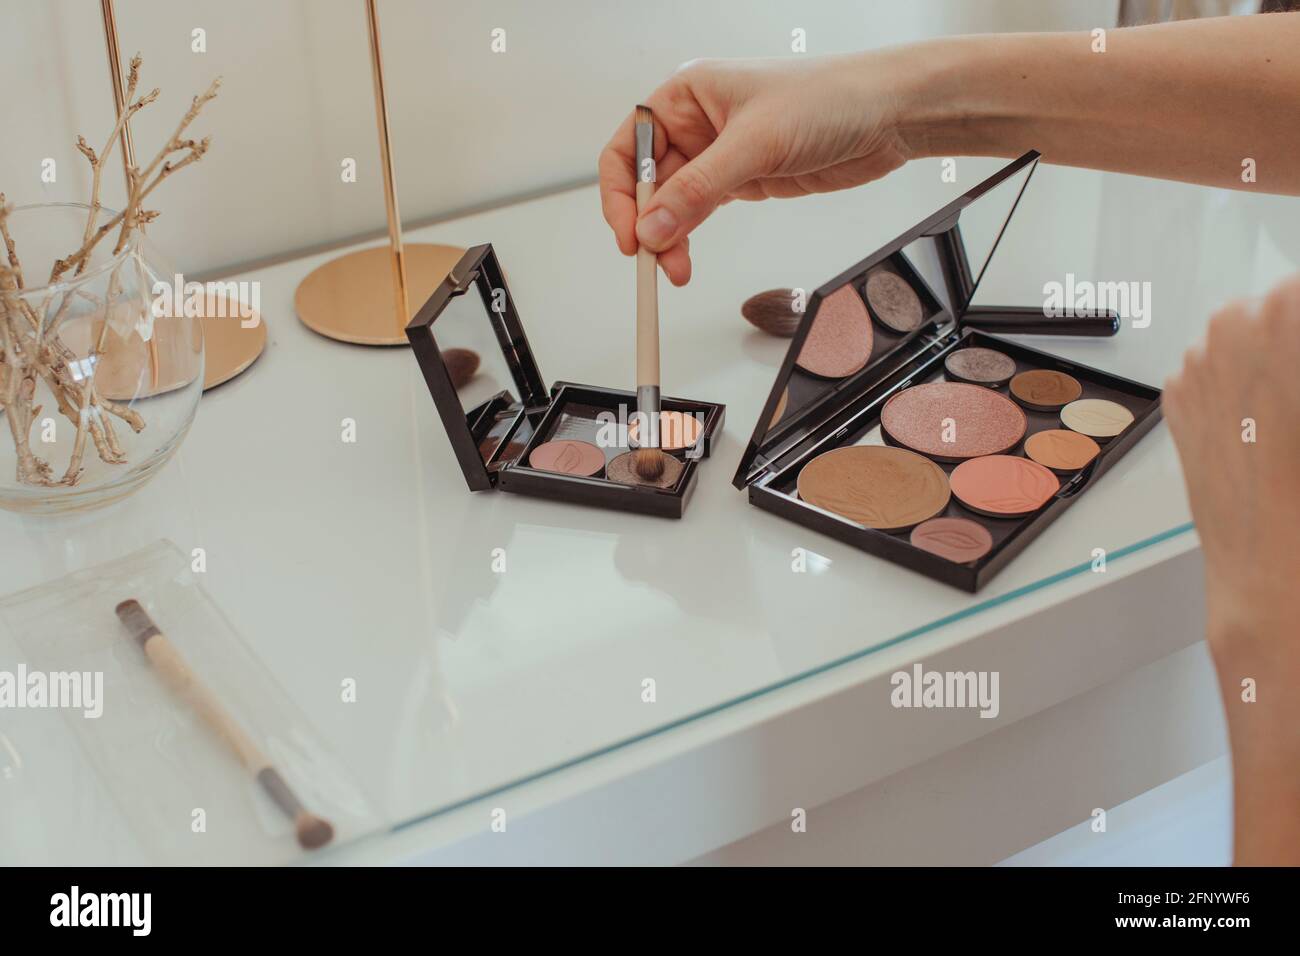 Close-up of a woman's hand dipping a make-up brush in a make-up palette on a dressing table Stock Photo